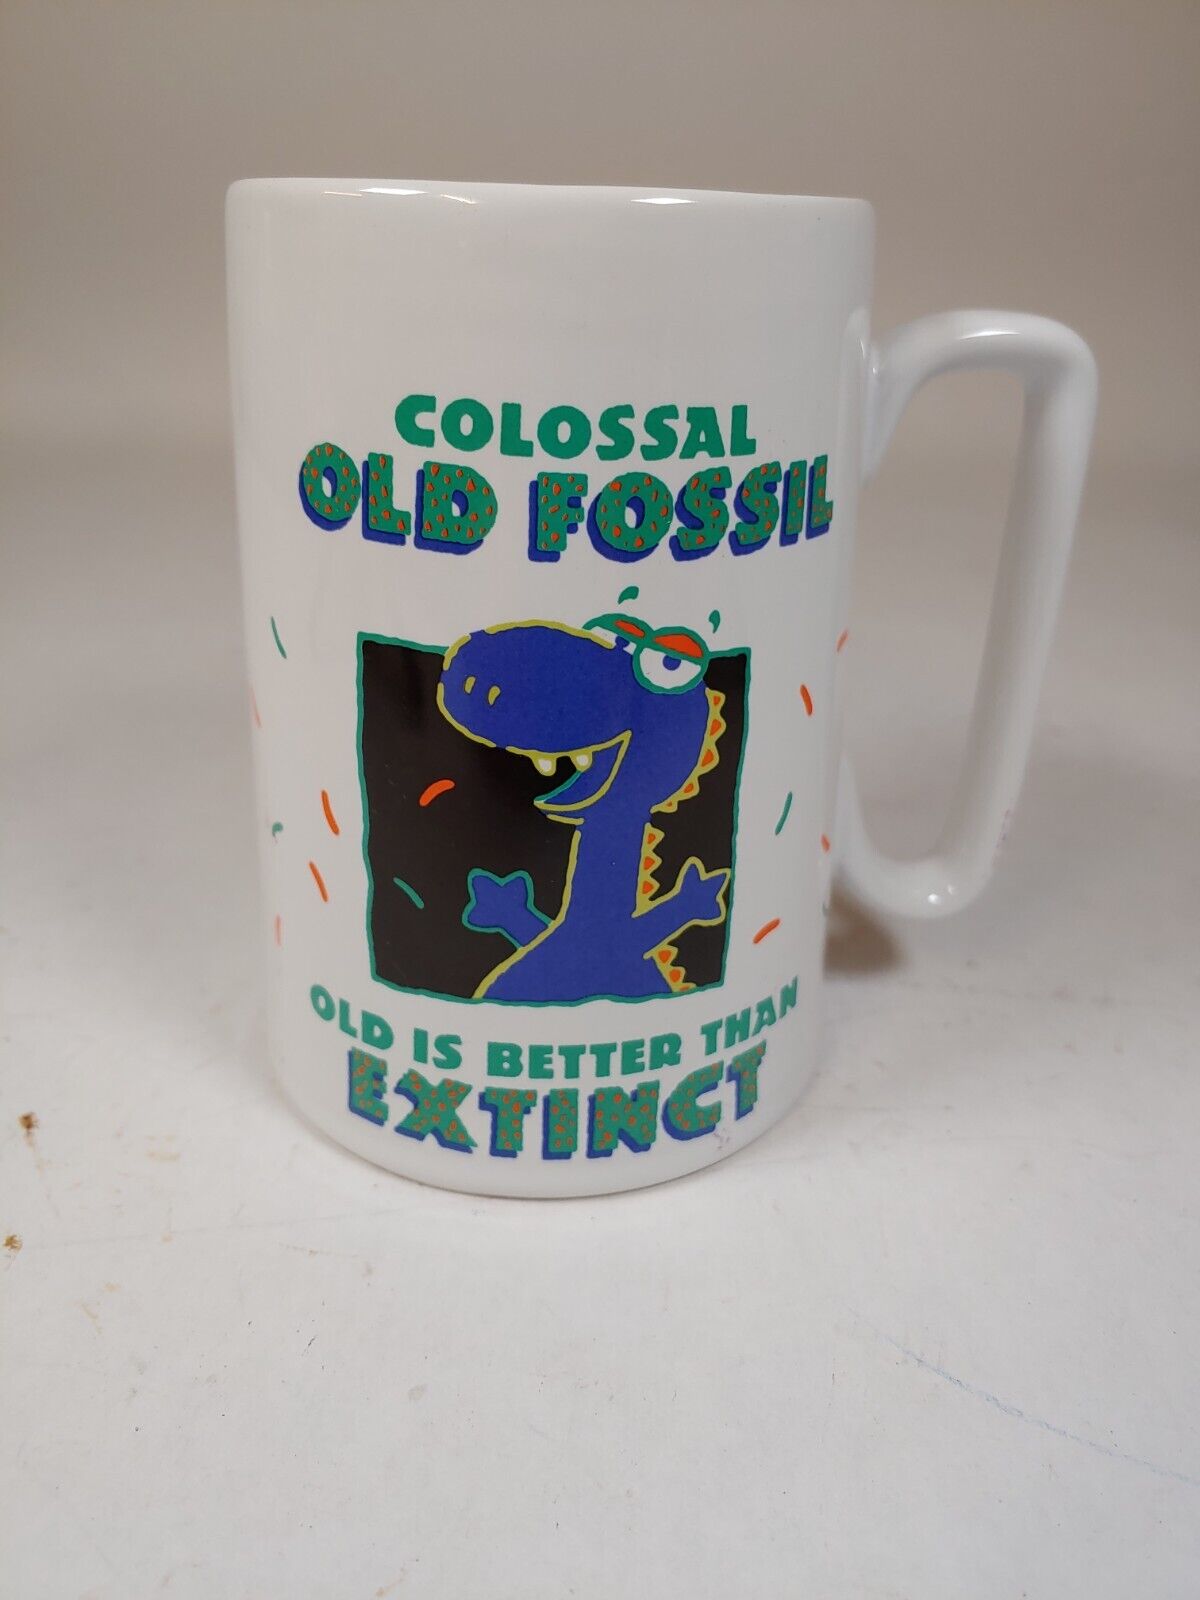 VINTAGE HALLMARK Coffee Mug . Party Express, Colossal Old Fossil